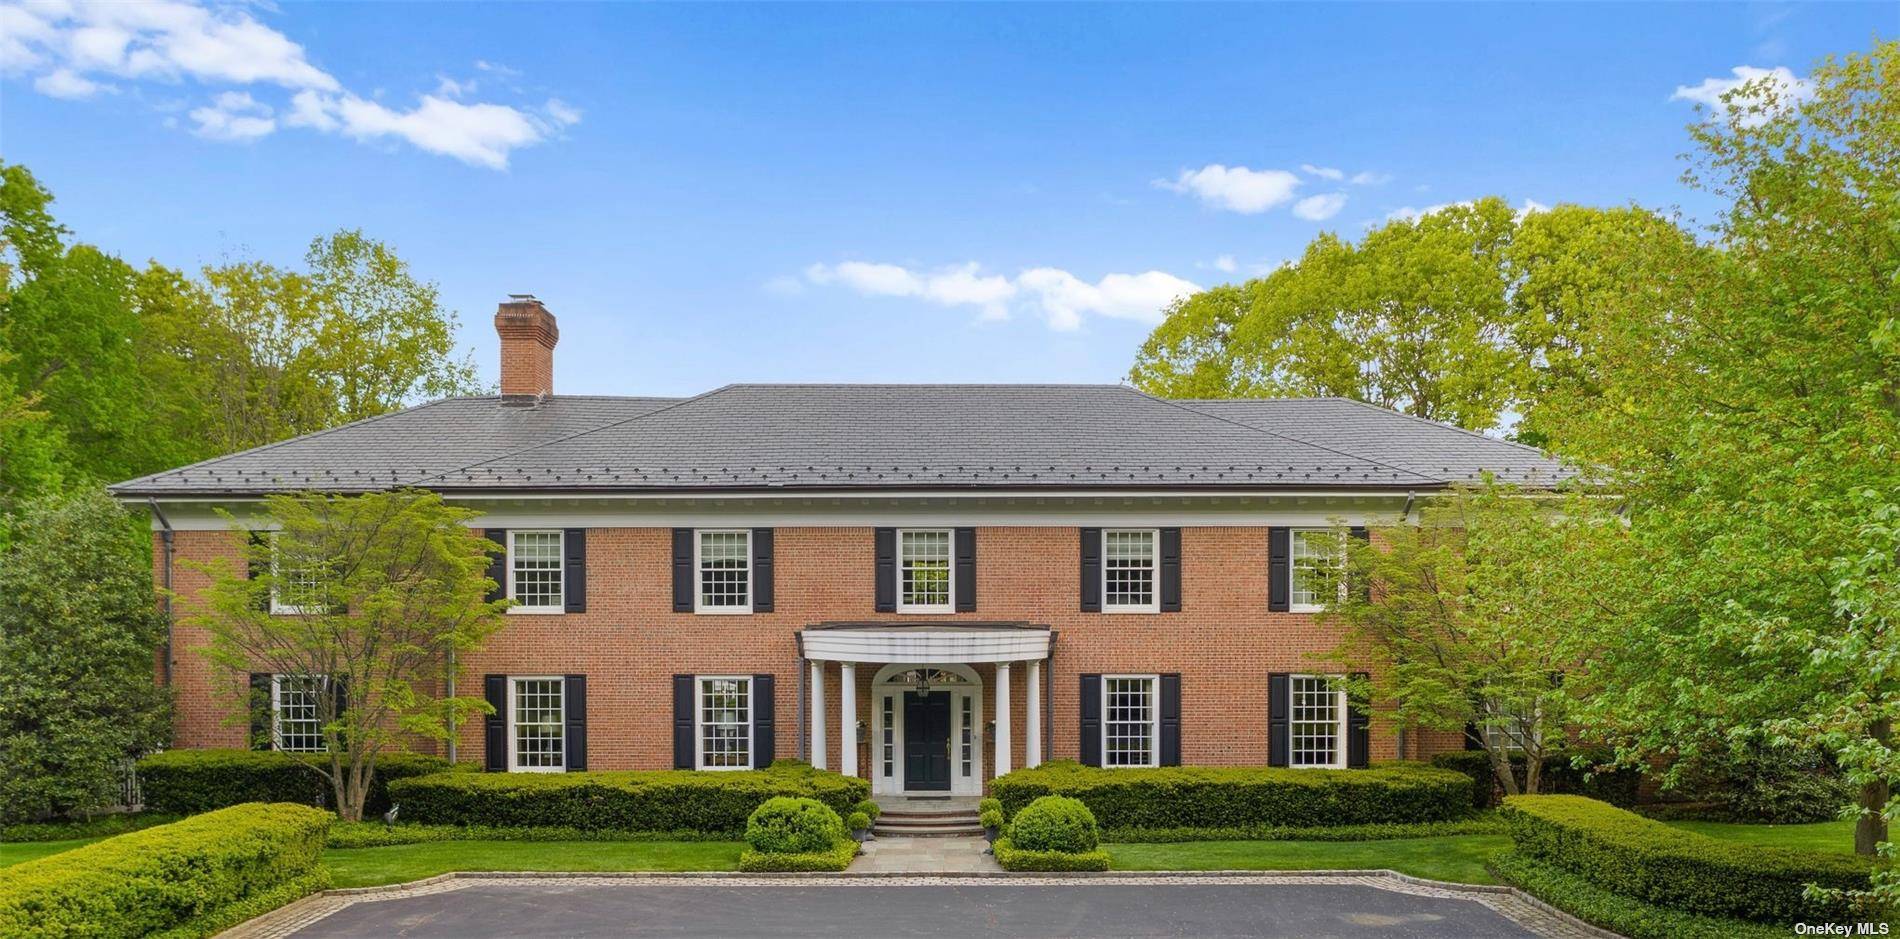 This exceptional 8 bedroom brick Colonial residence is set on 8.